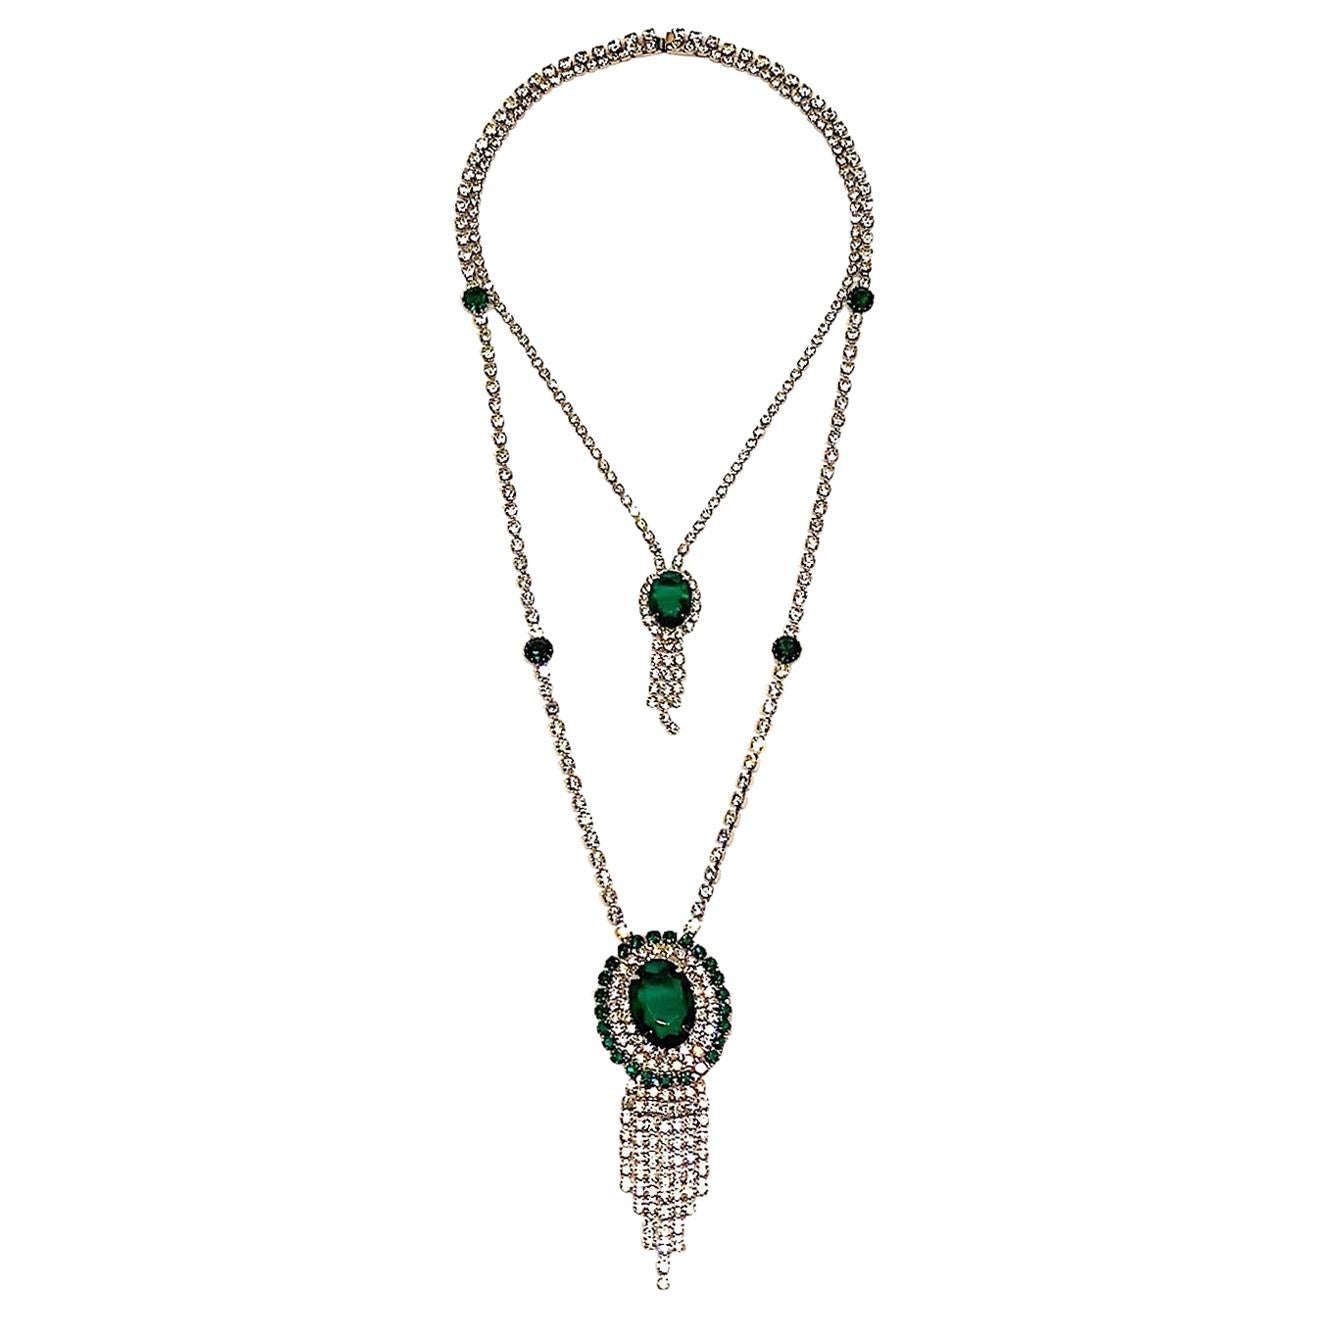 1950s / 1960s Emerald Green Crystal & Rhinestone Double Pendant Necklace